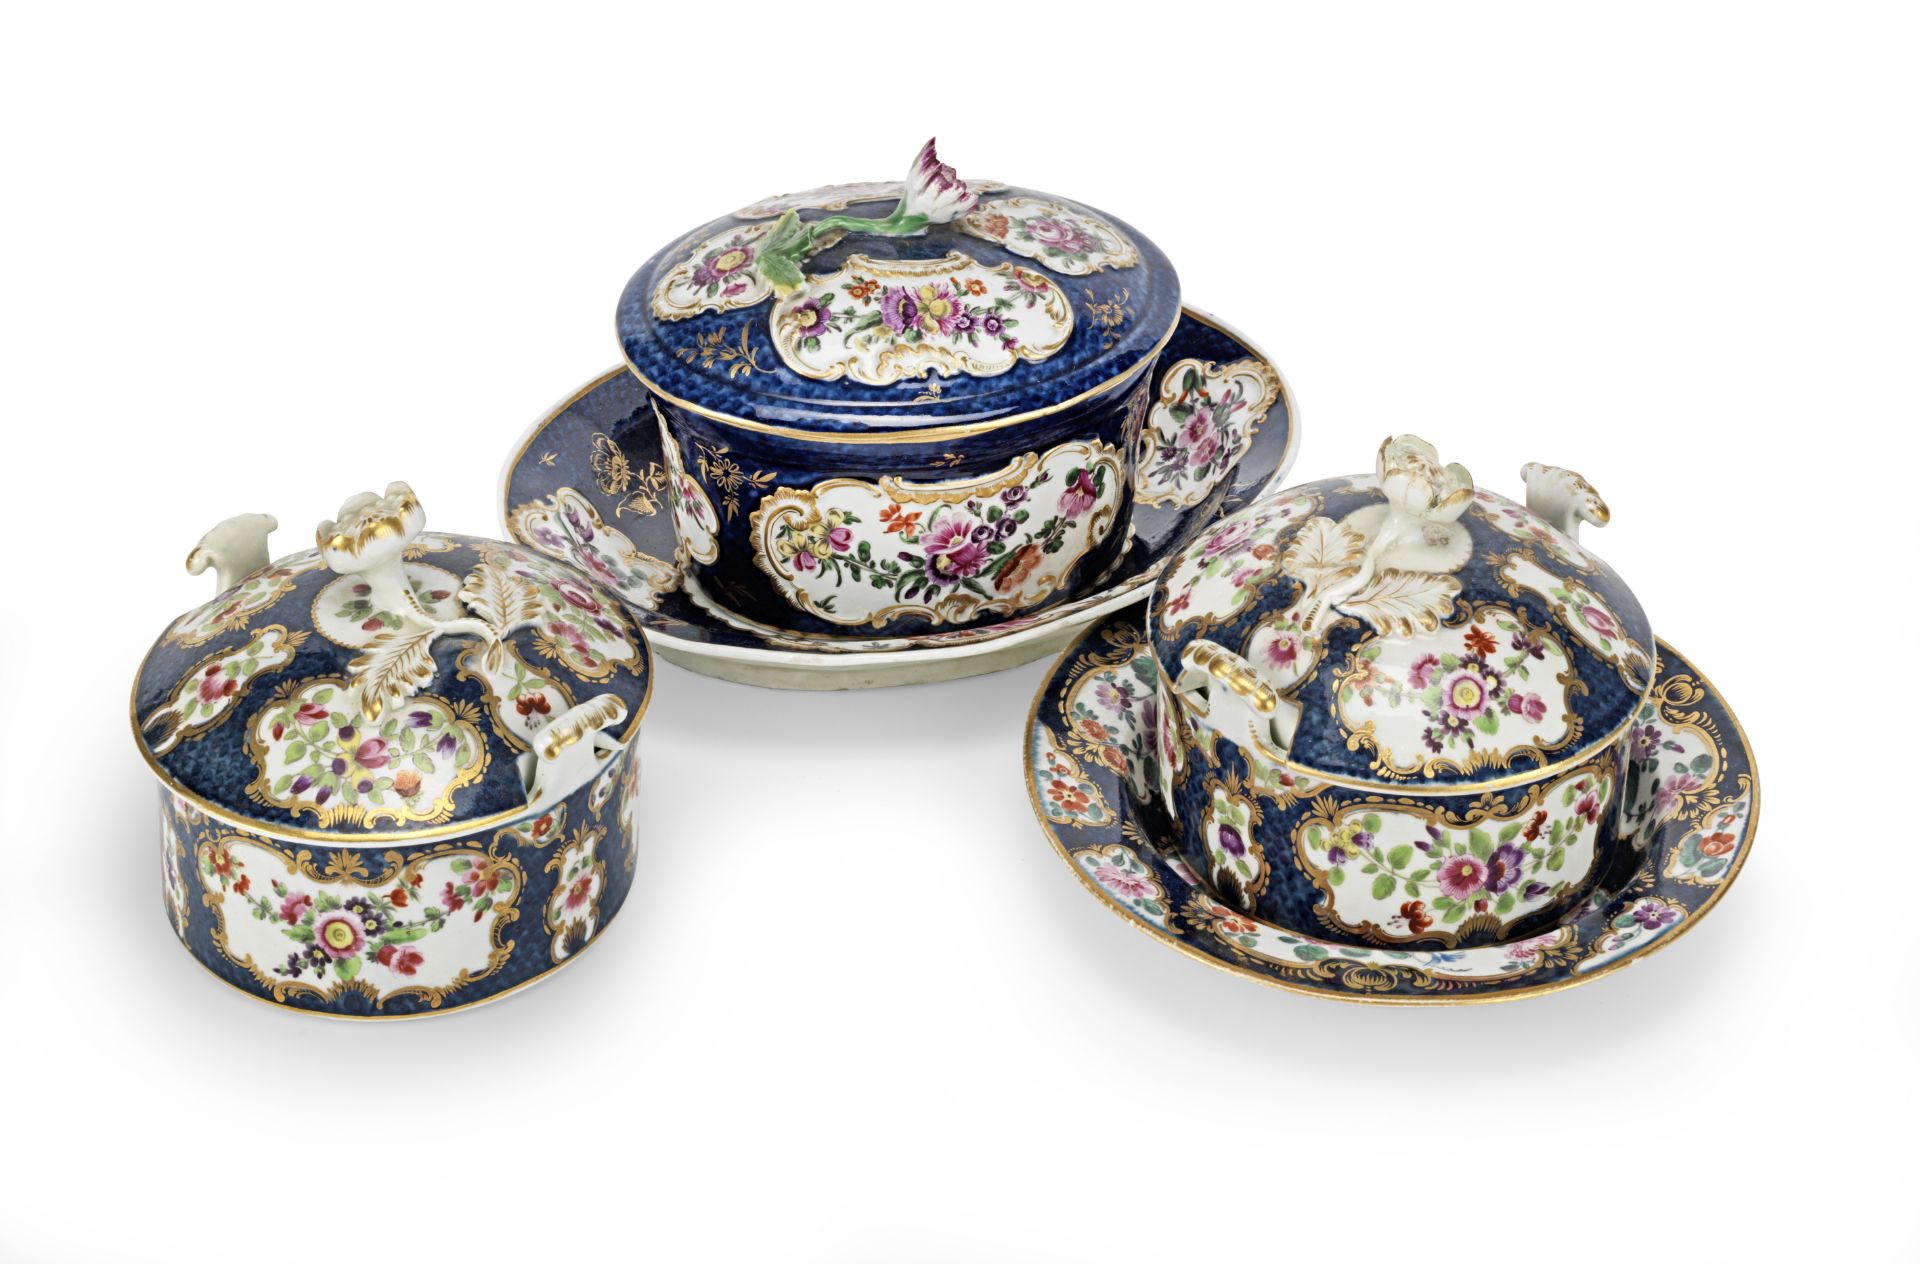 Three Worcester butter tubs, circa 1770